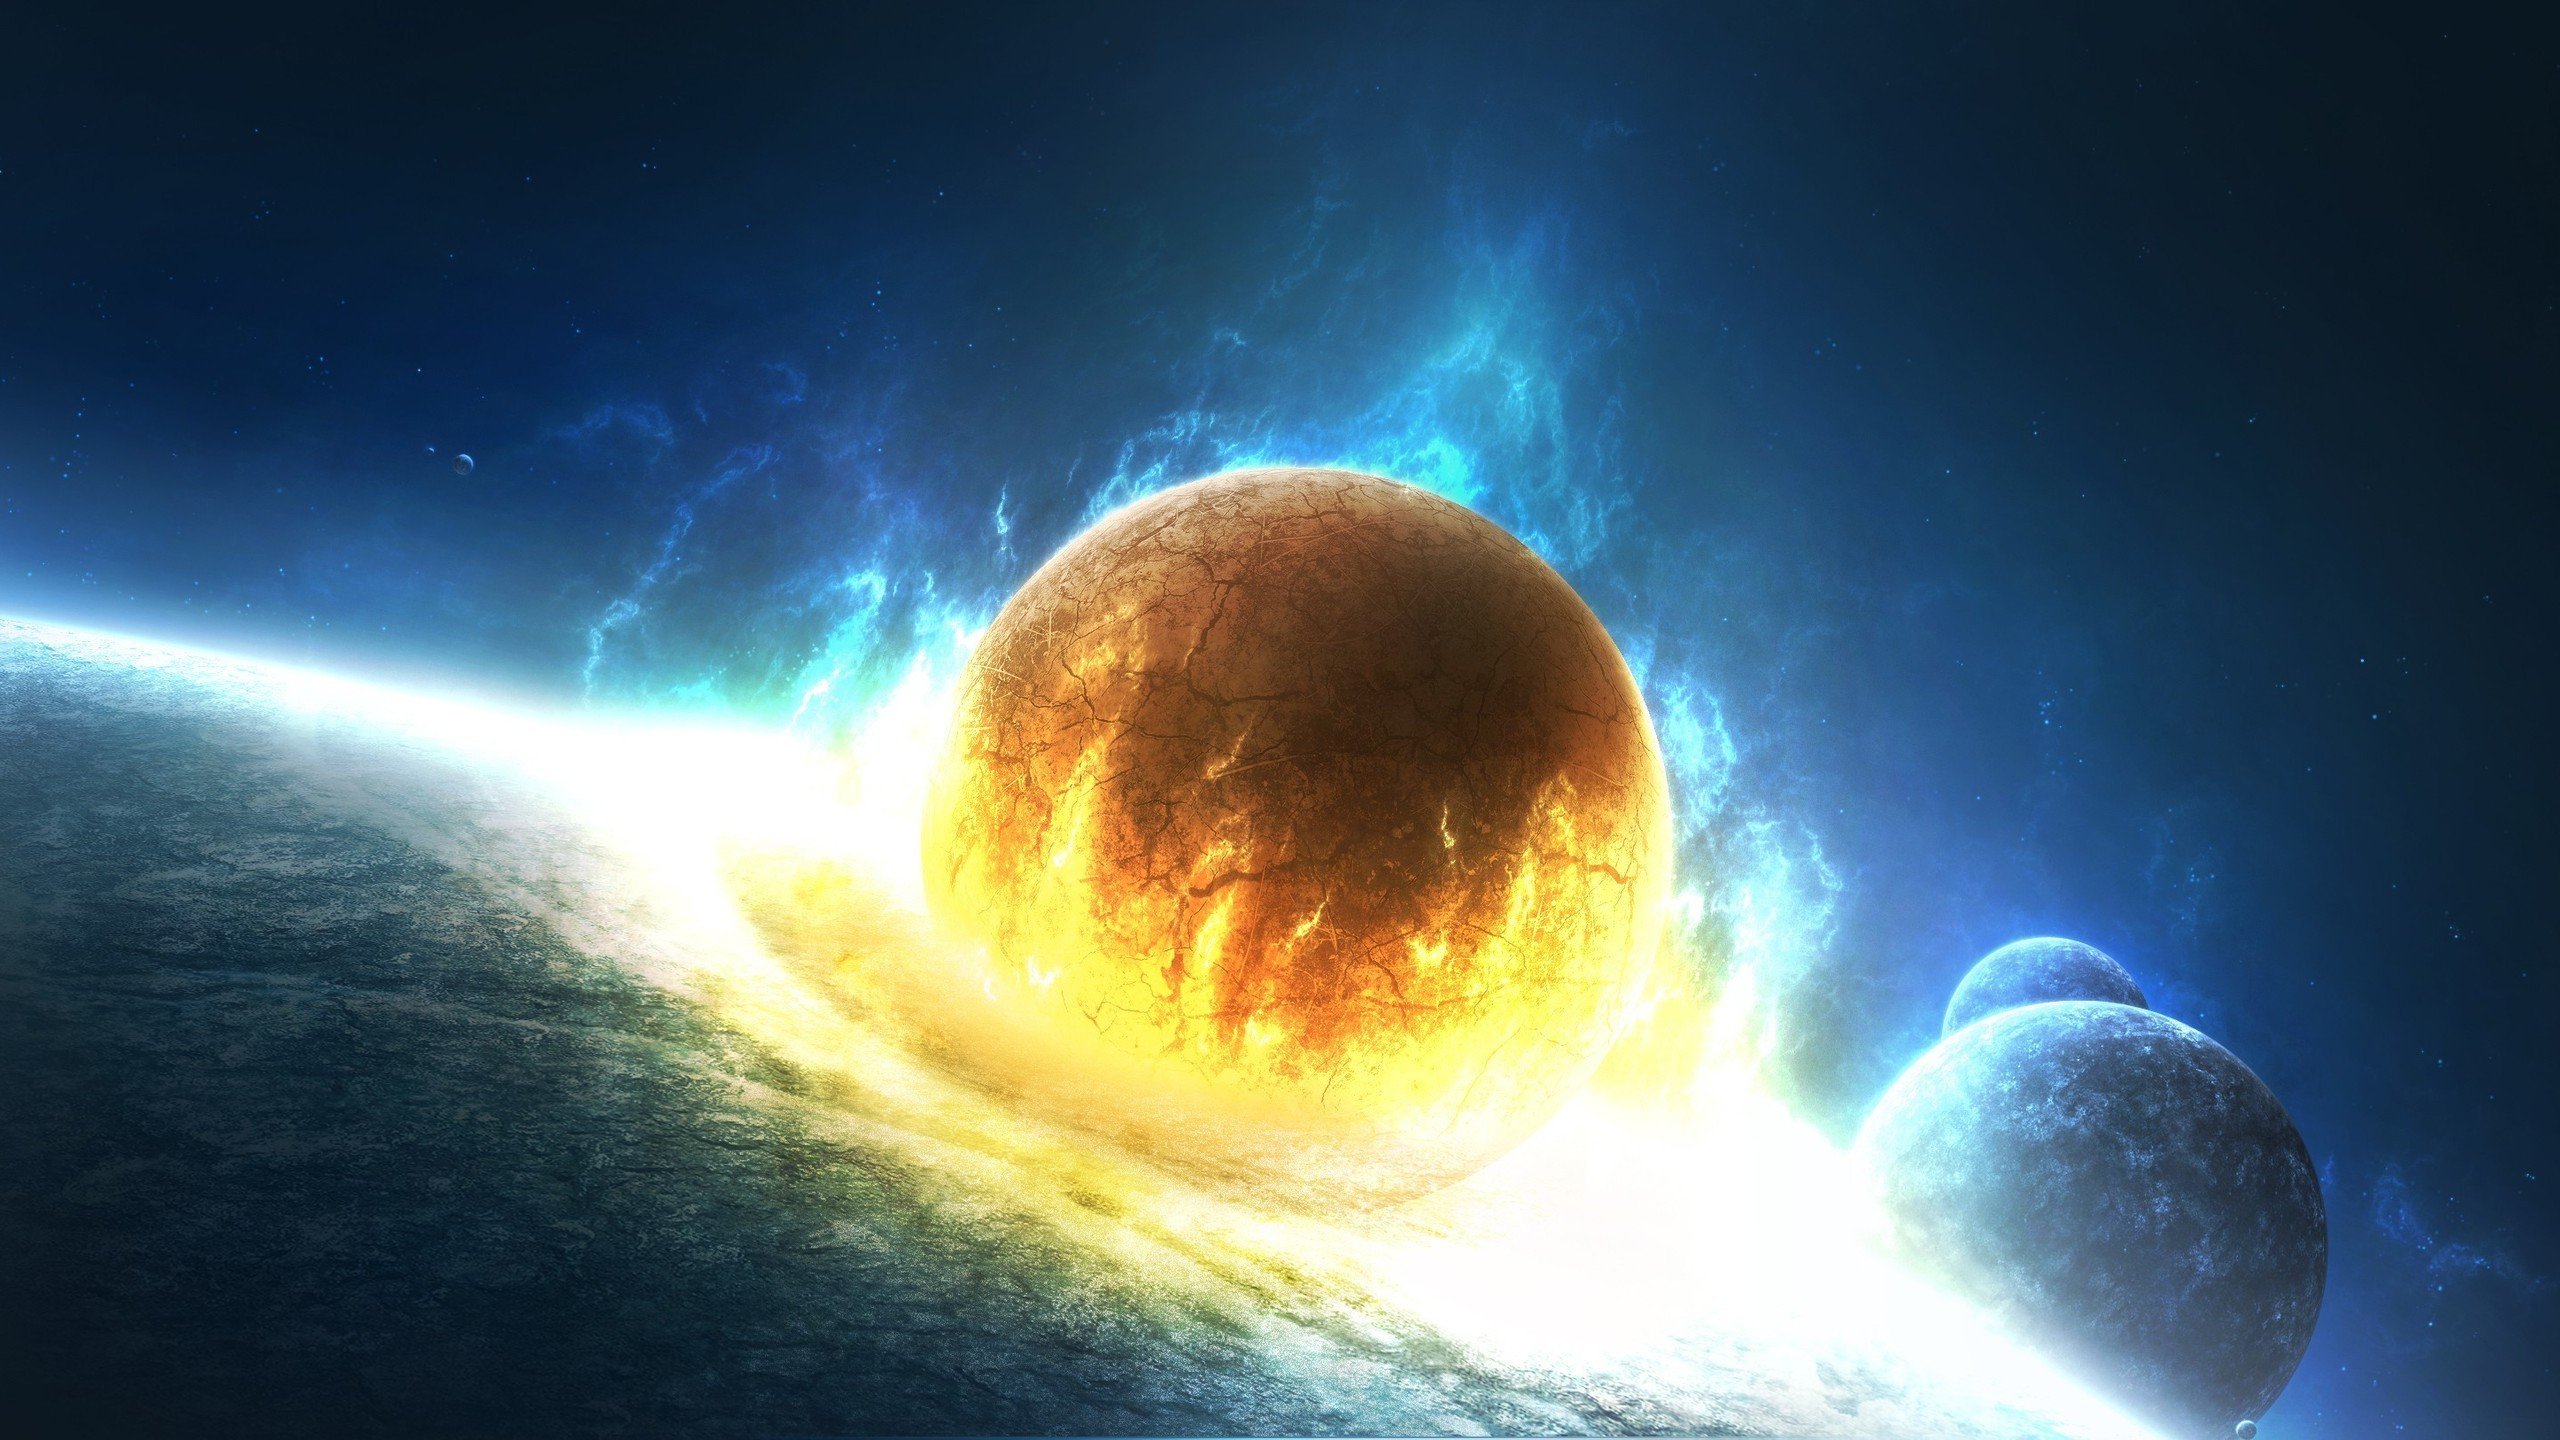 outer, Space, Stars, Explosions, Planets, Fire, Earth, Artwork, Collision Wallpaper